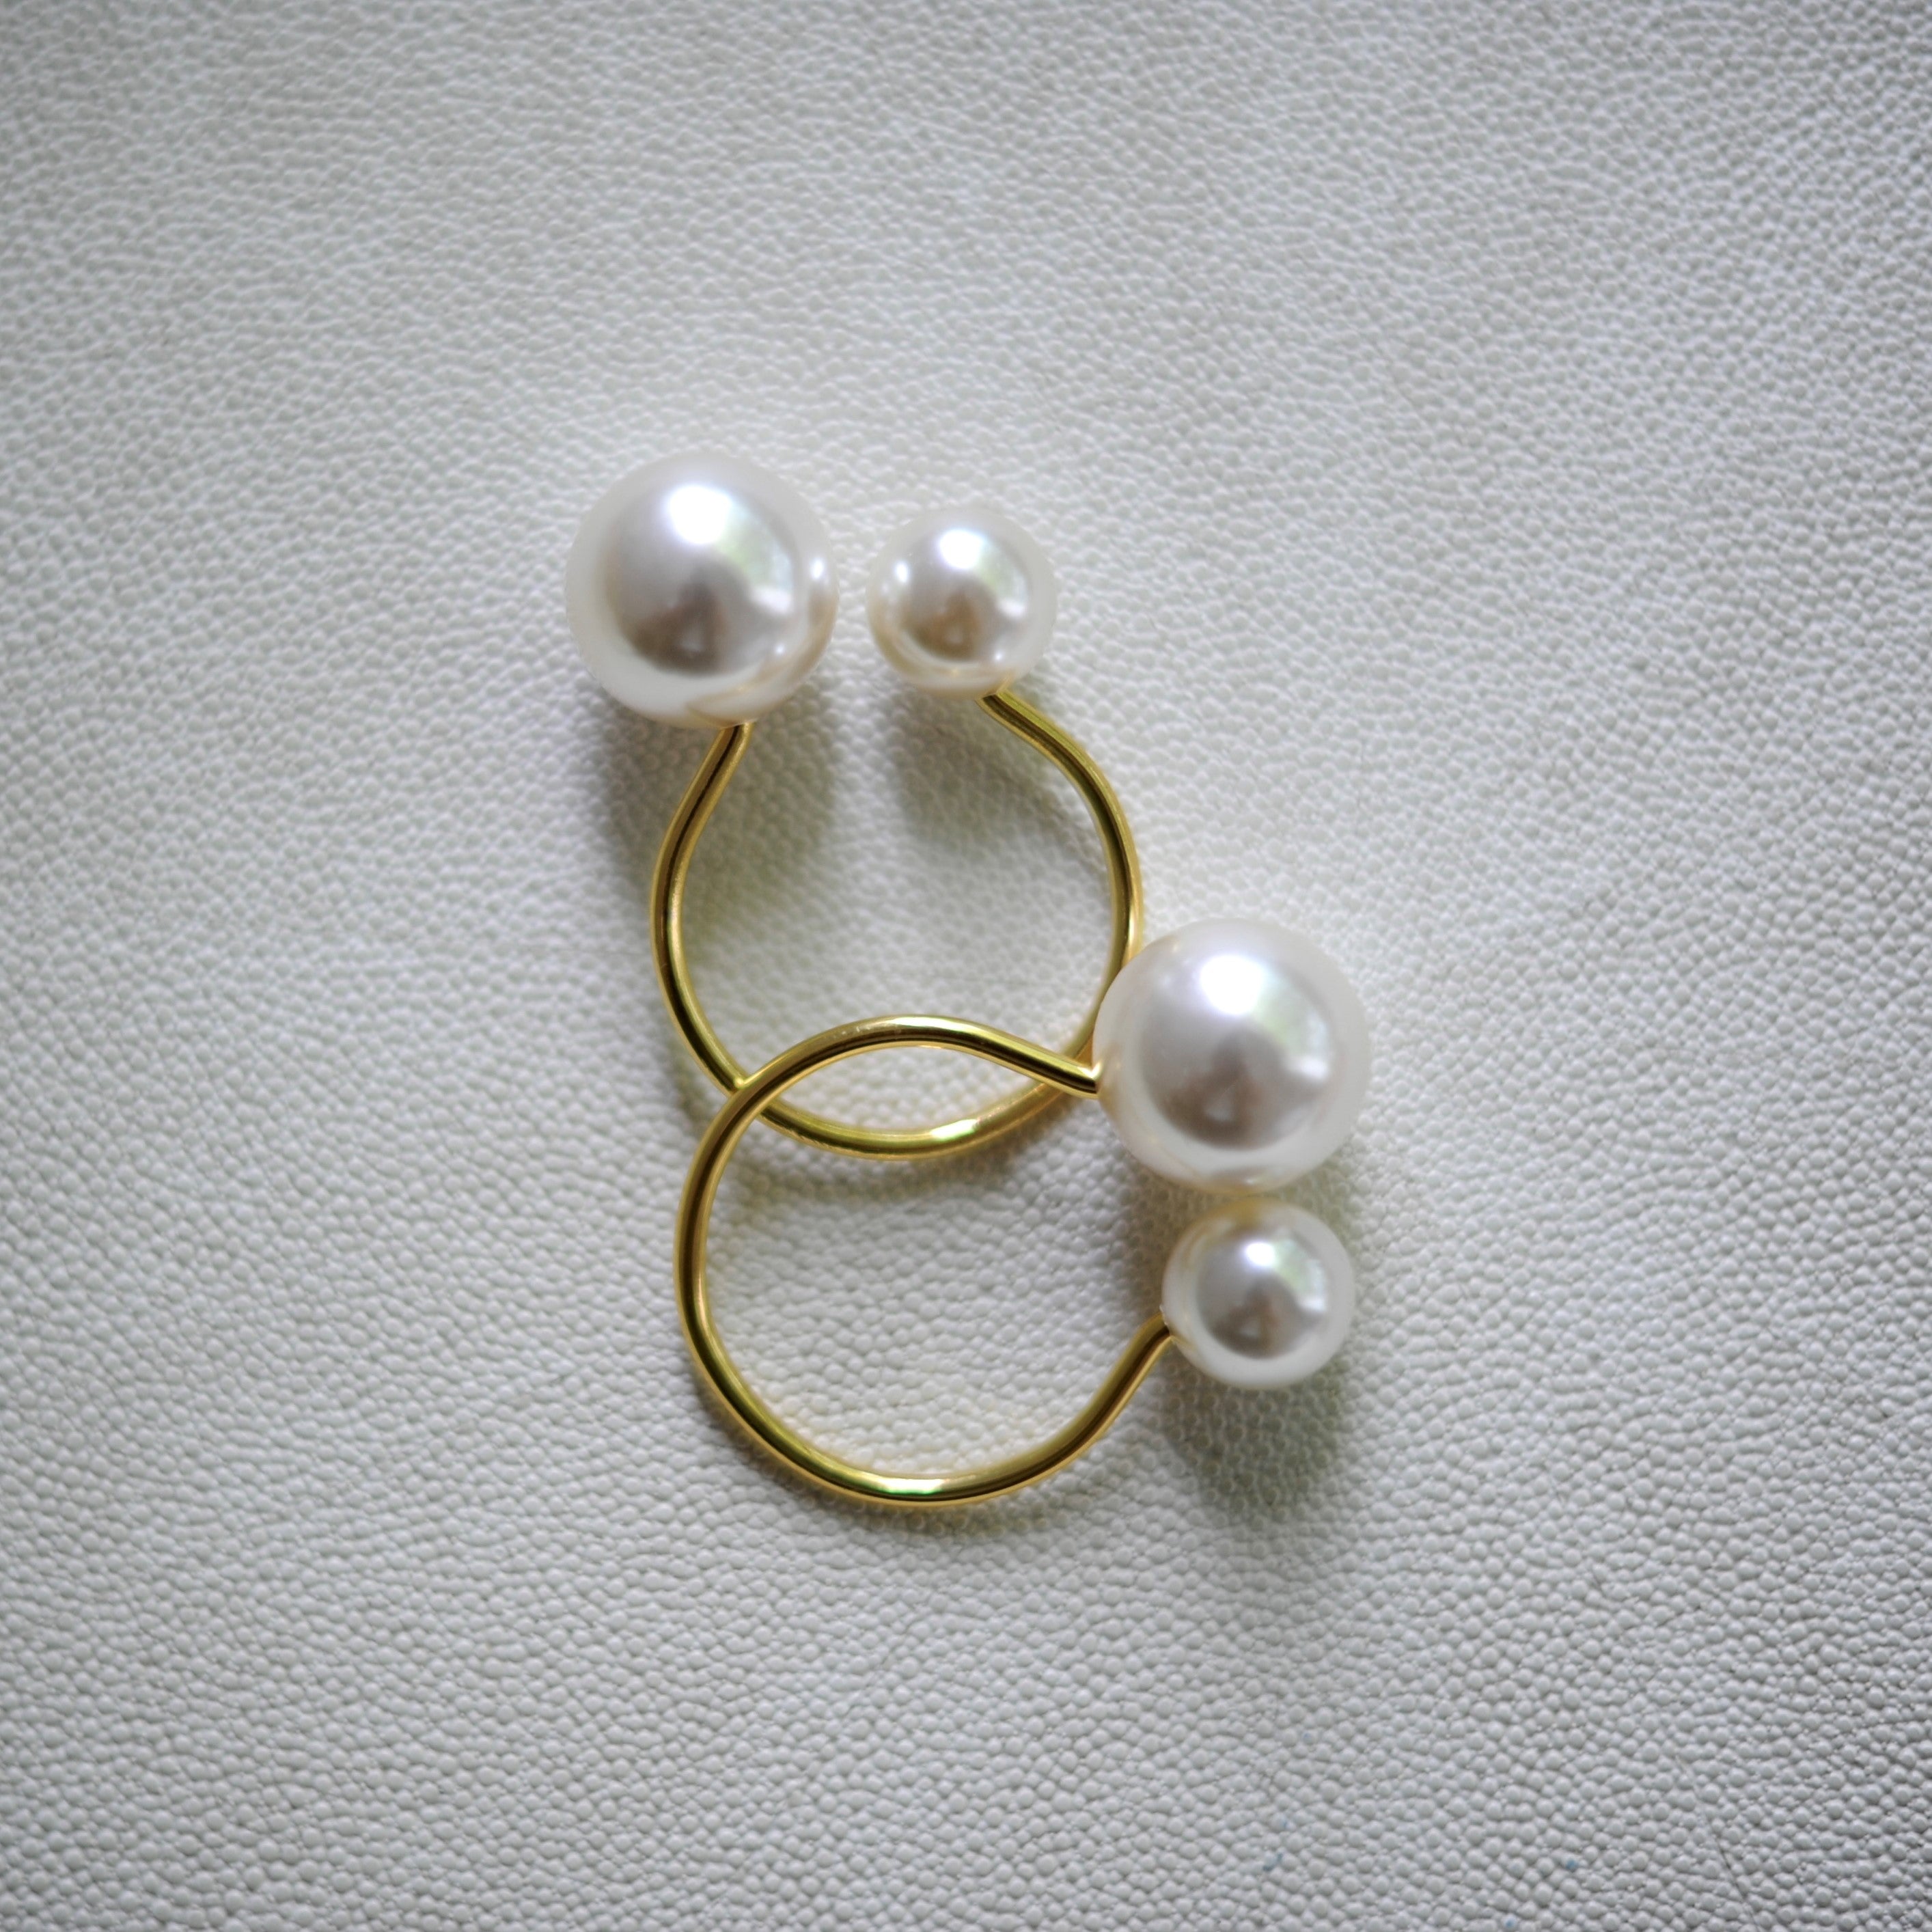 Faux Pearl Napkin Ring Set of 4.